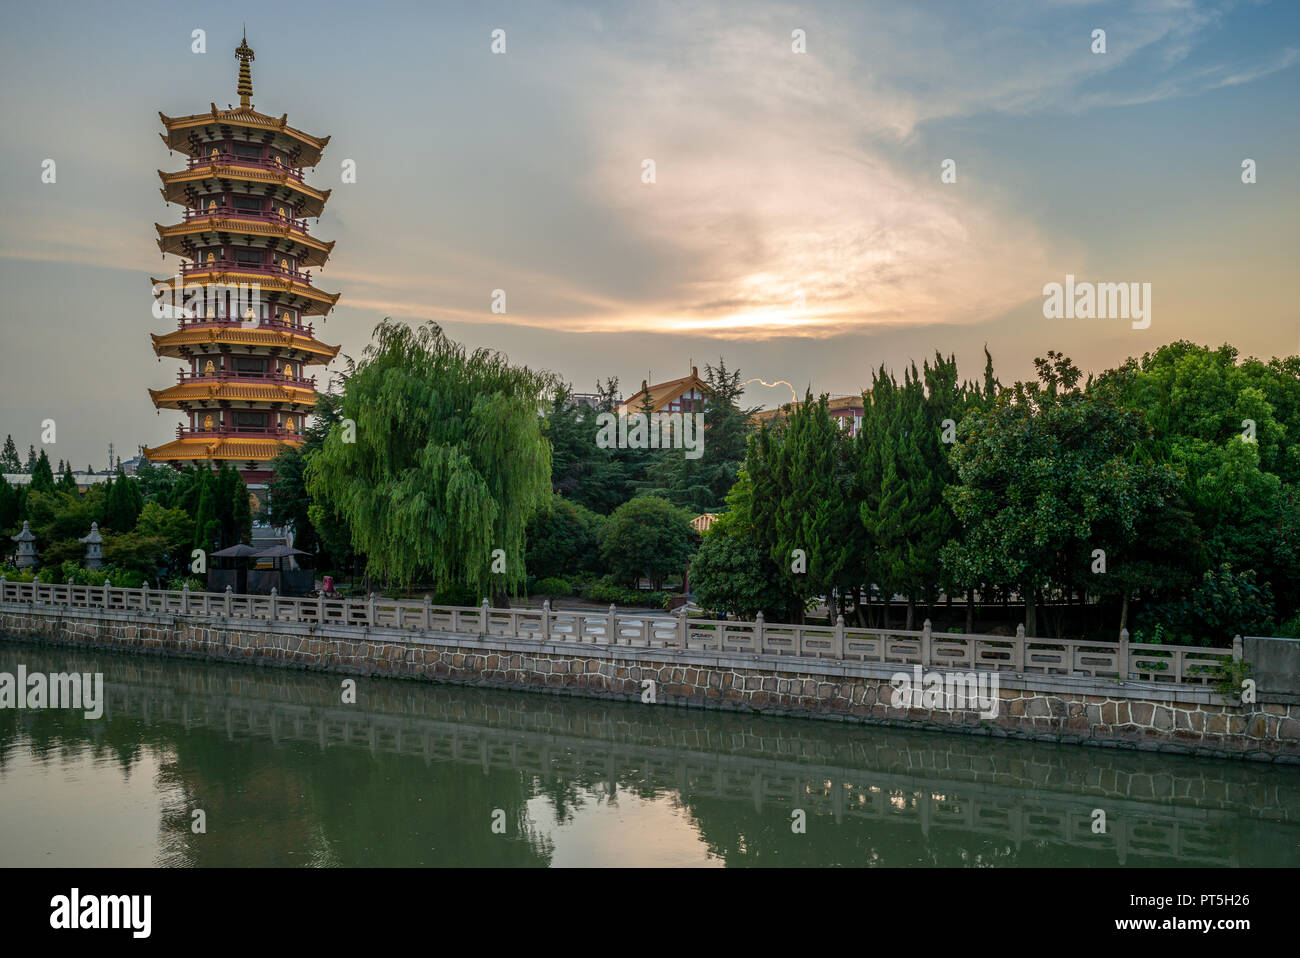 Bell Tower of qibao temple at qibao ancient town in shanghai Stock Photo